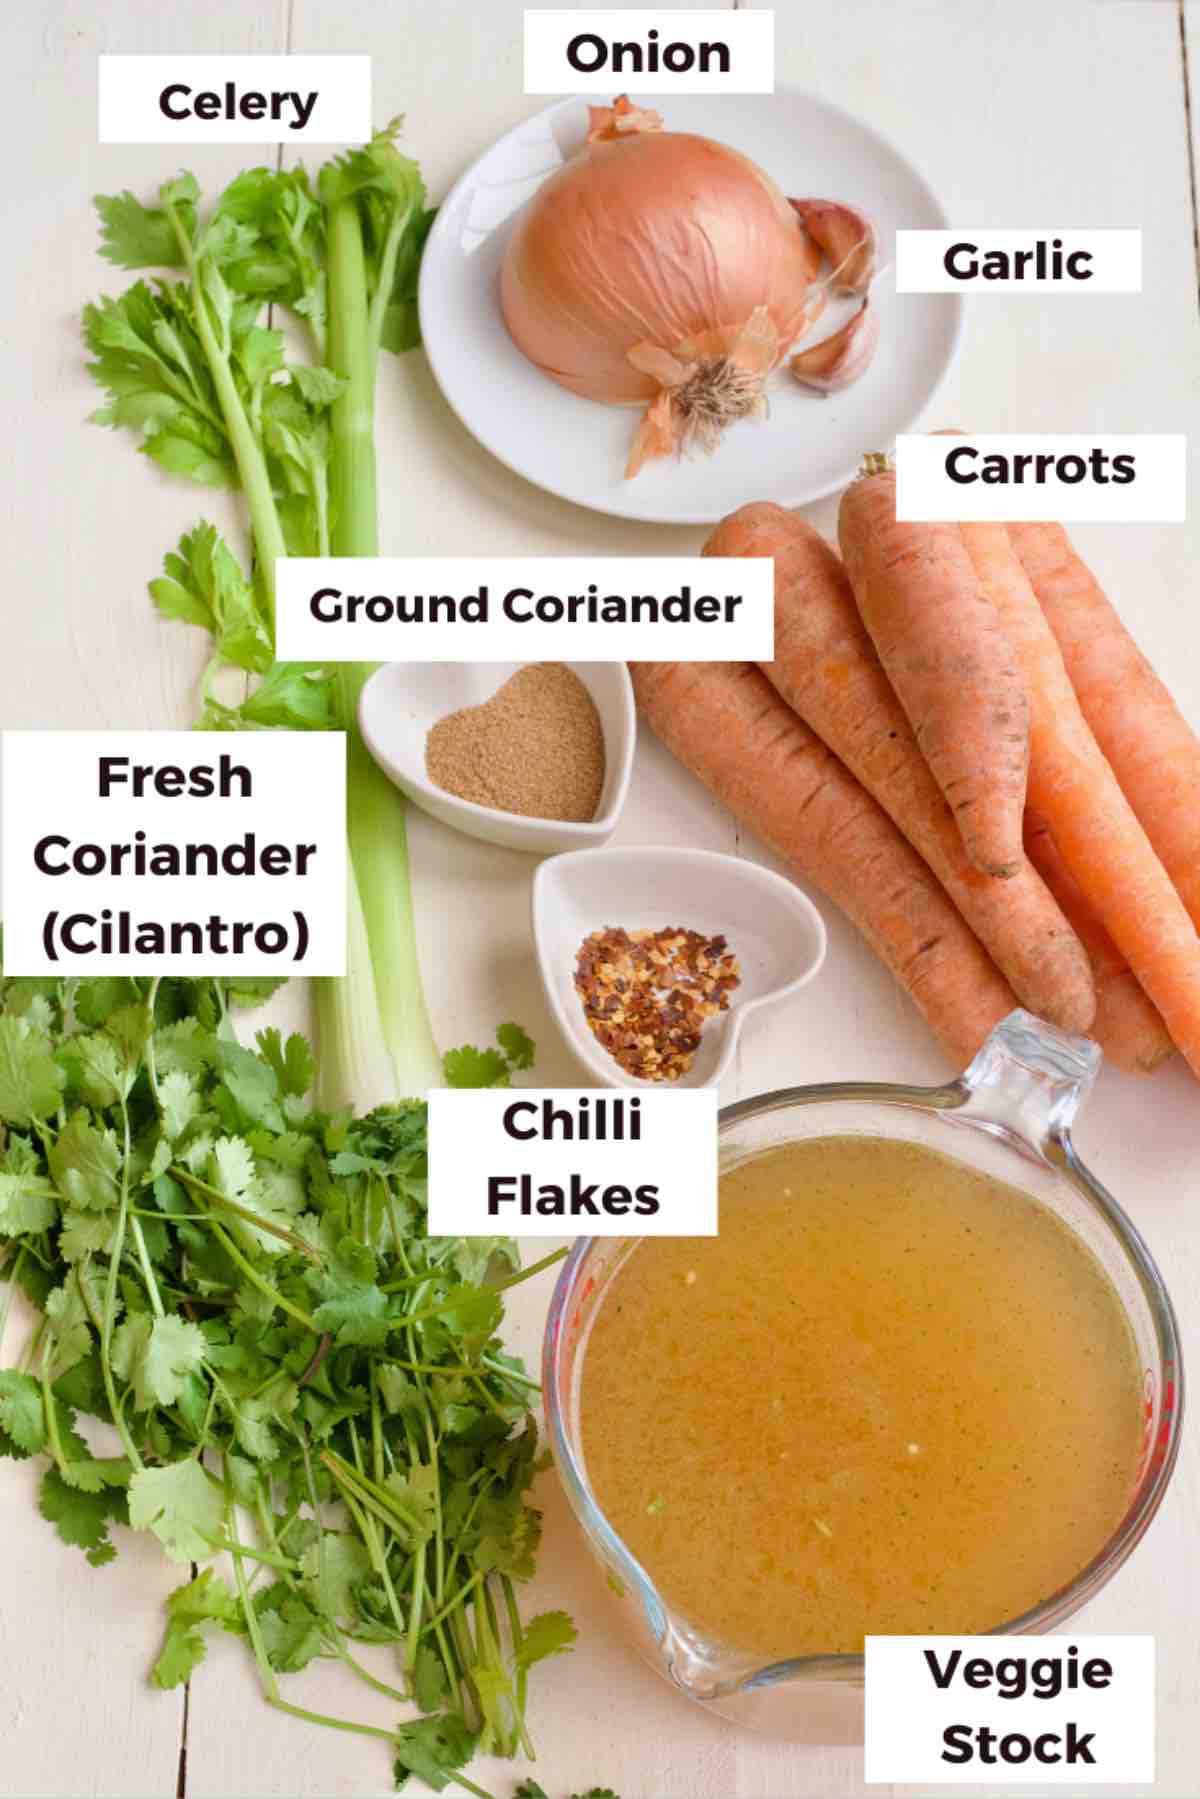 Ingredients for making carrot and coriander soup.